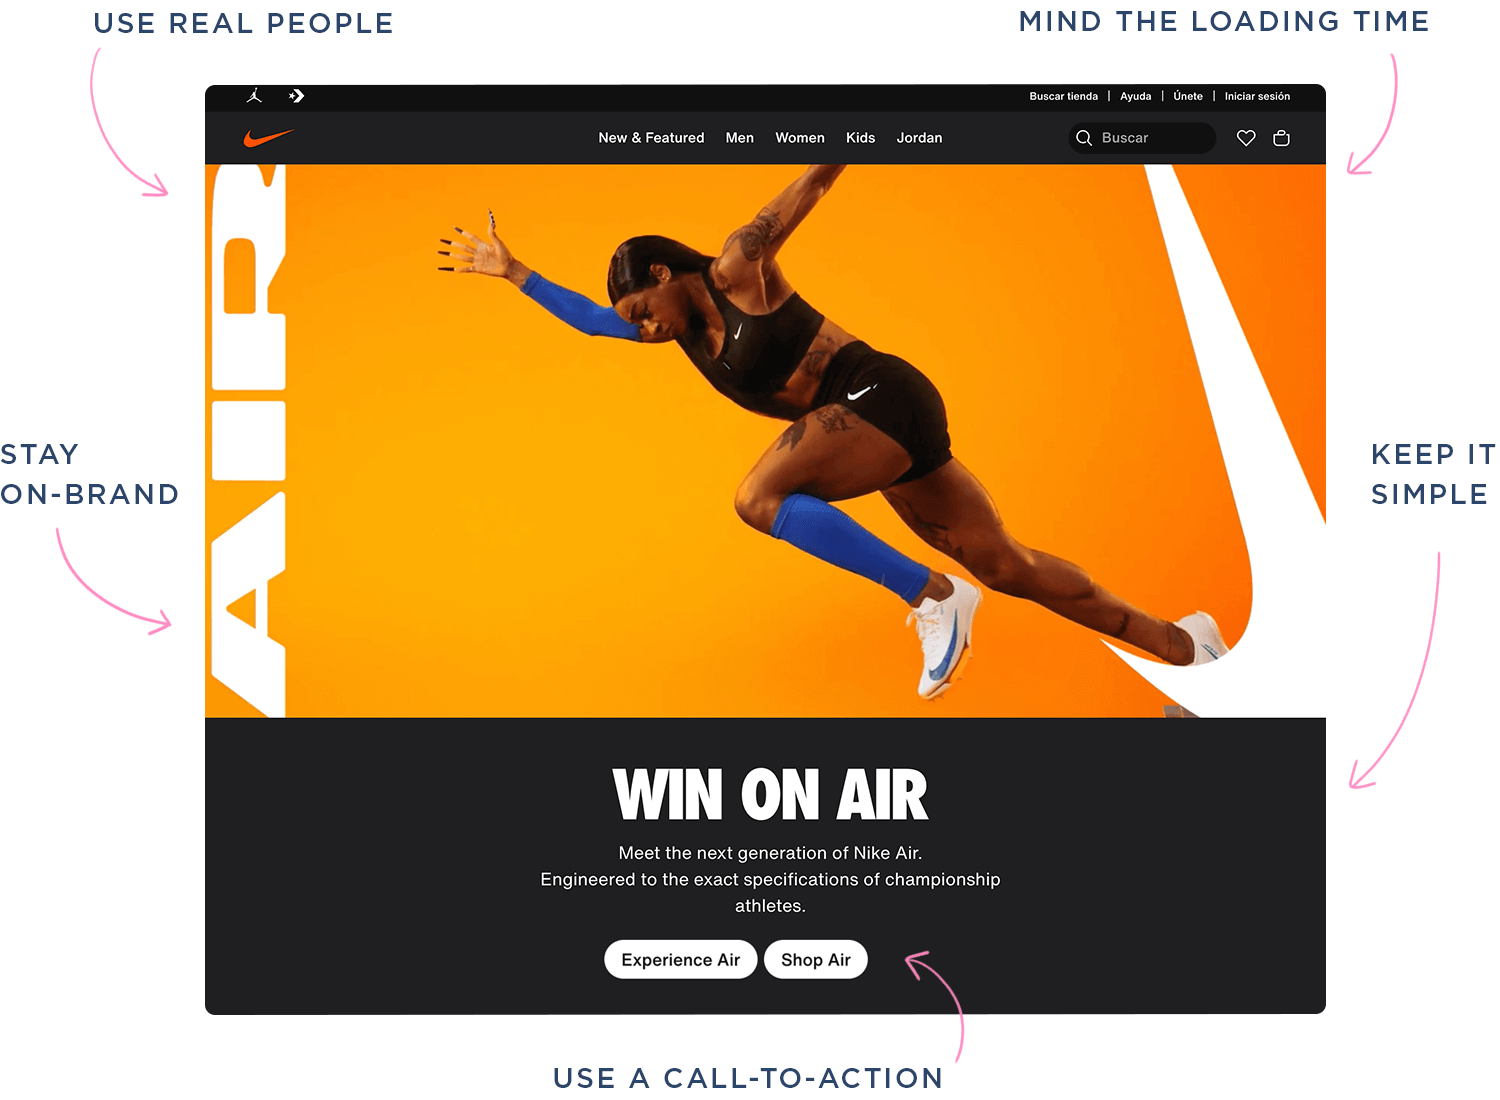 Nike Air hero image featuring a female athlete in mid-jump with call-to-action buttons